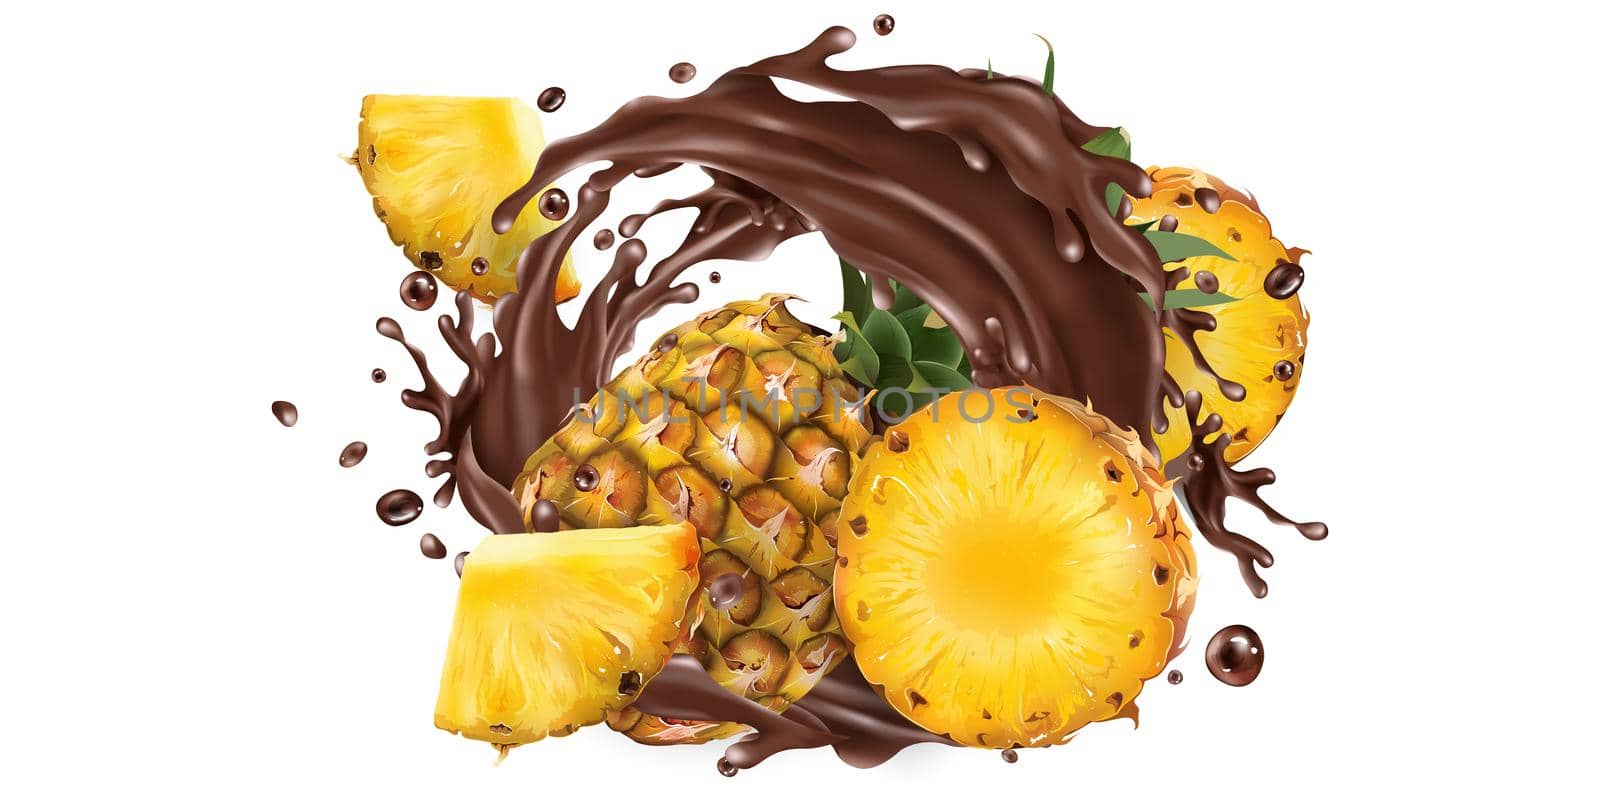 Fresh pineapples and a splash of liquid chocolate on a white background. Realistic style illustration.